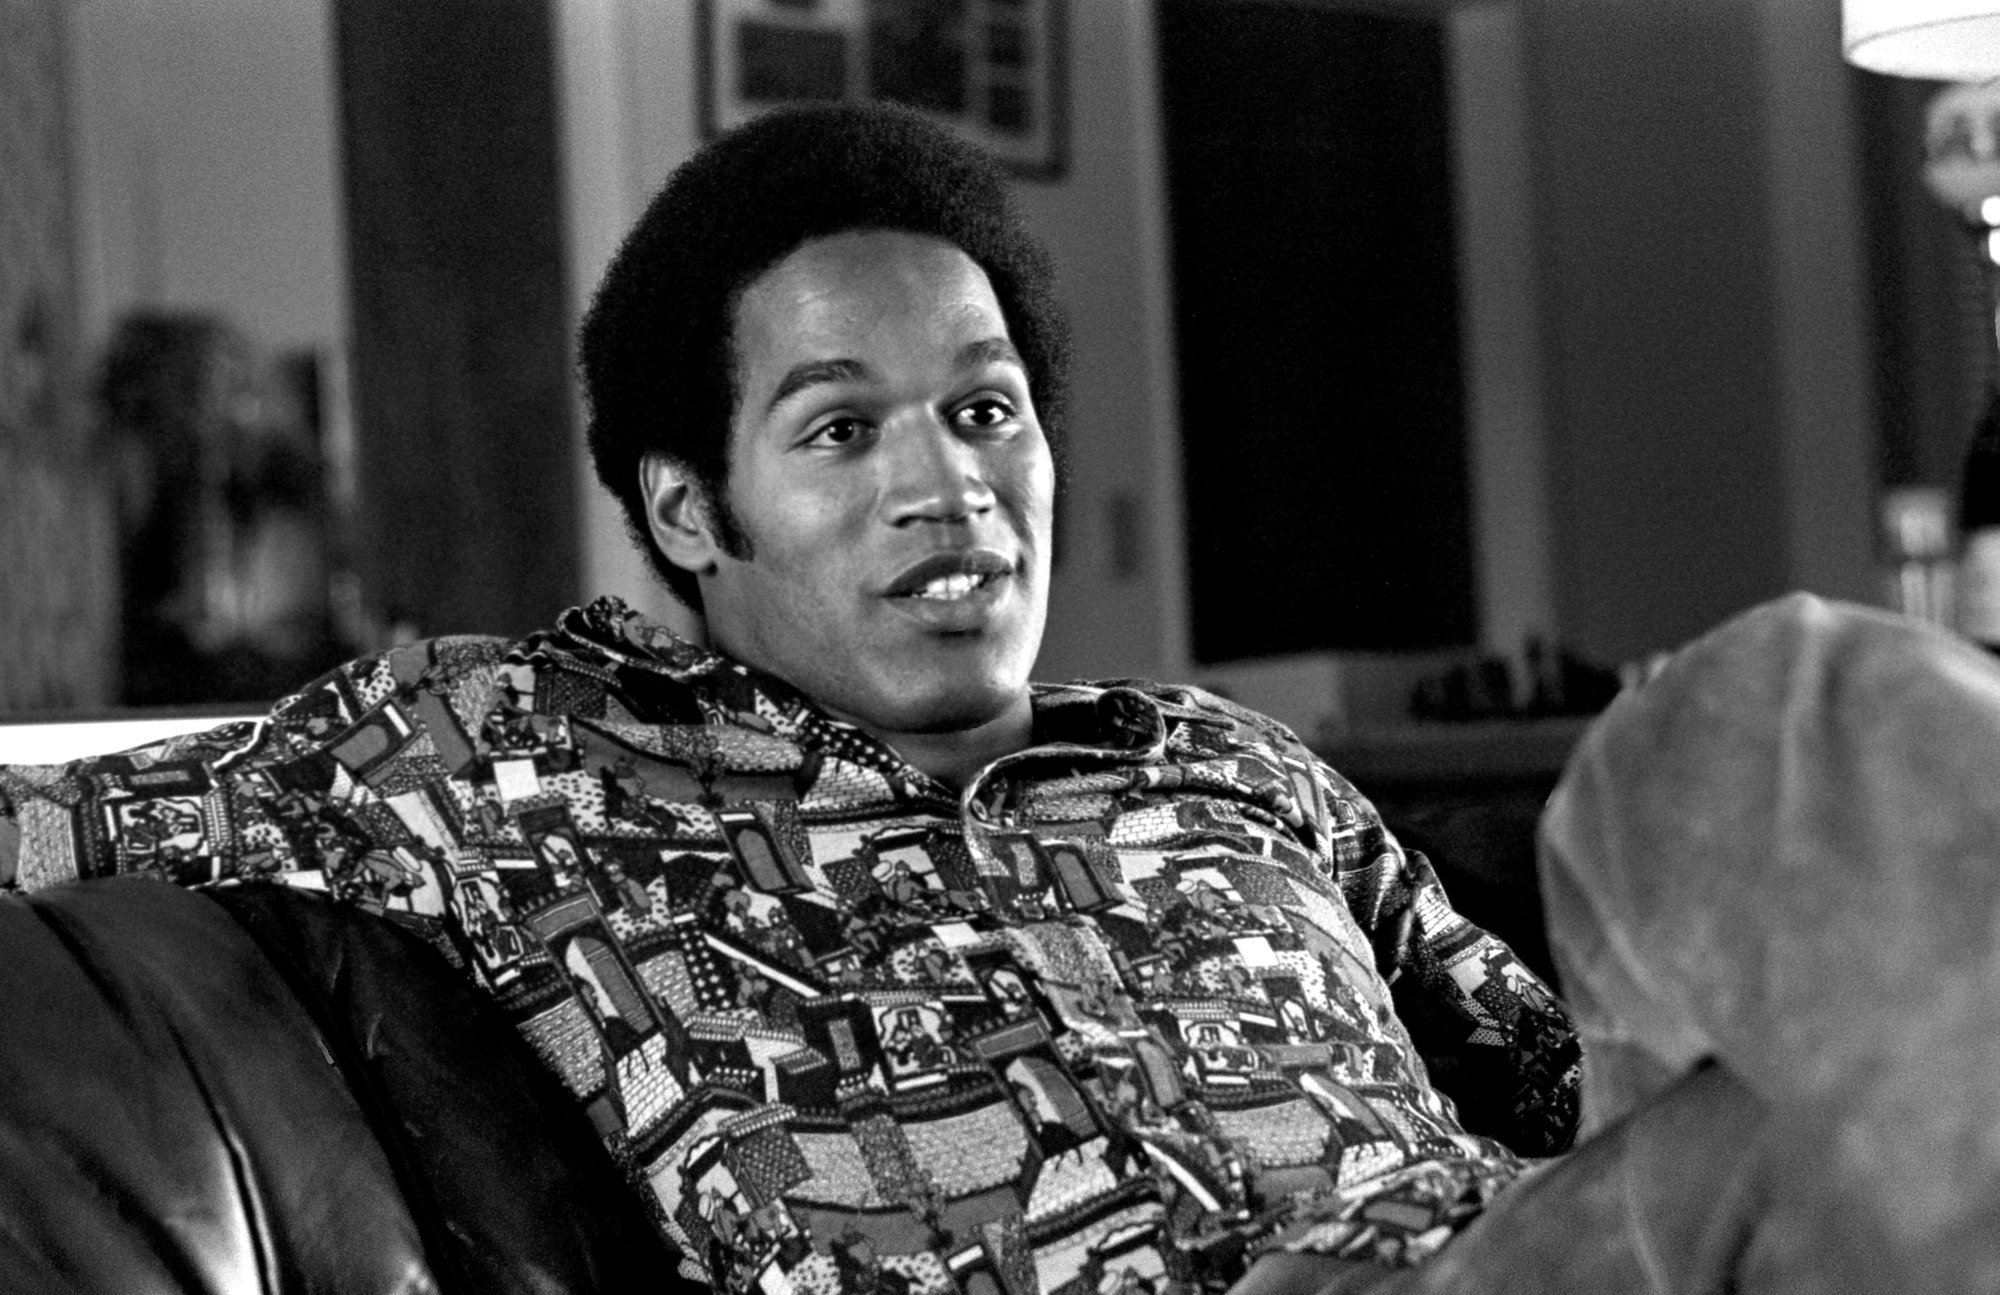 O.J. Simpson sitting on a couch, talking, in black and white